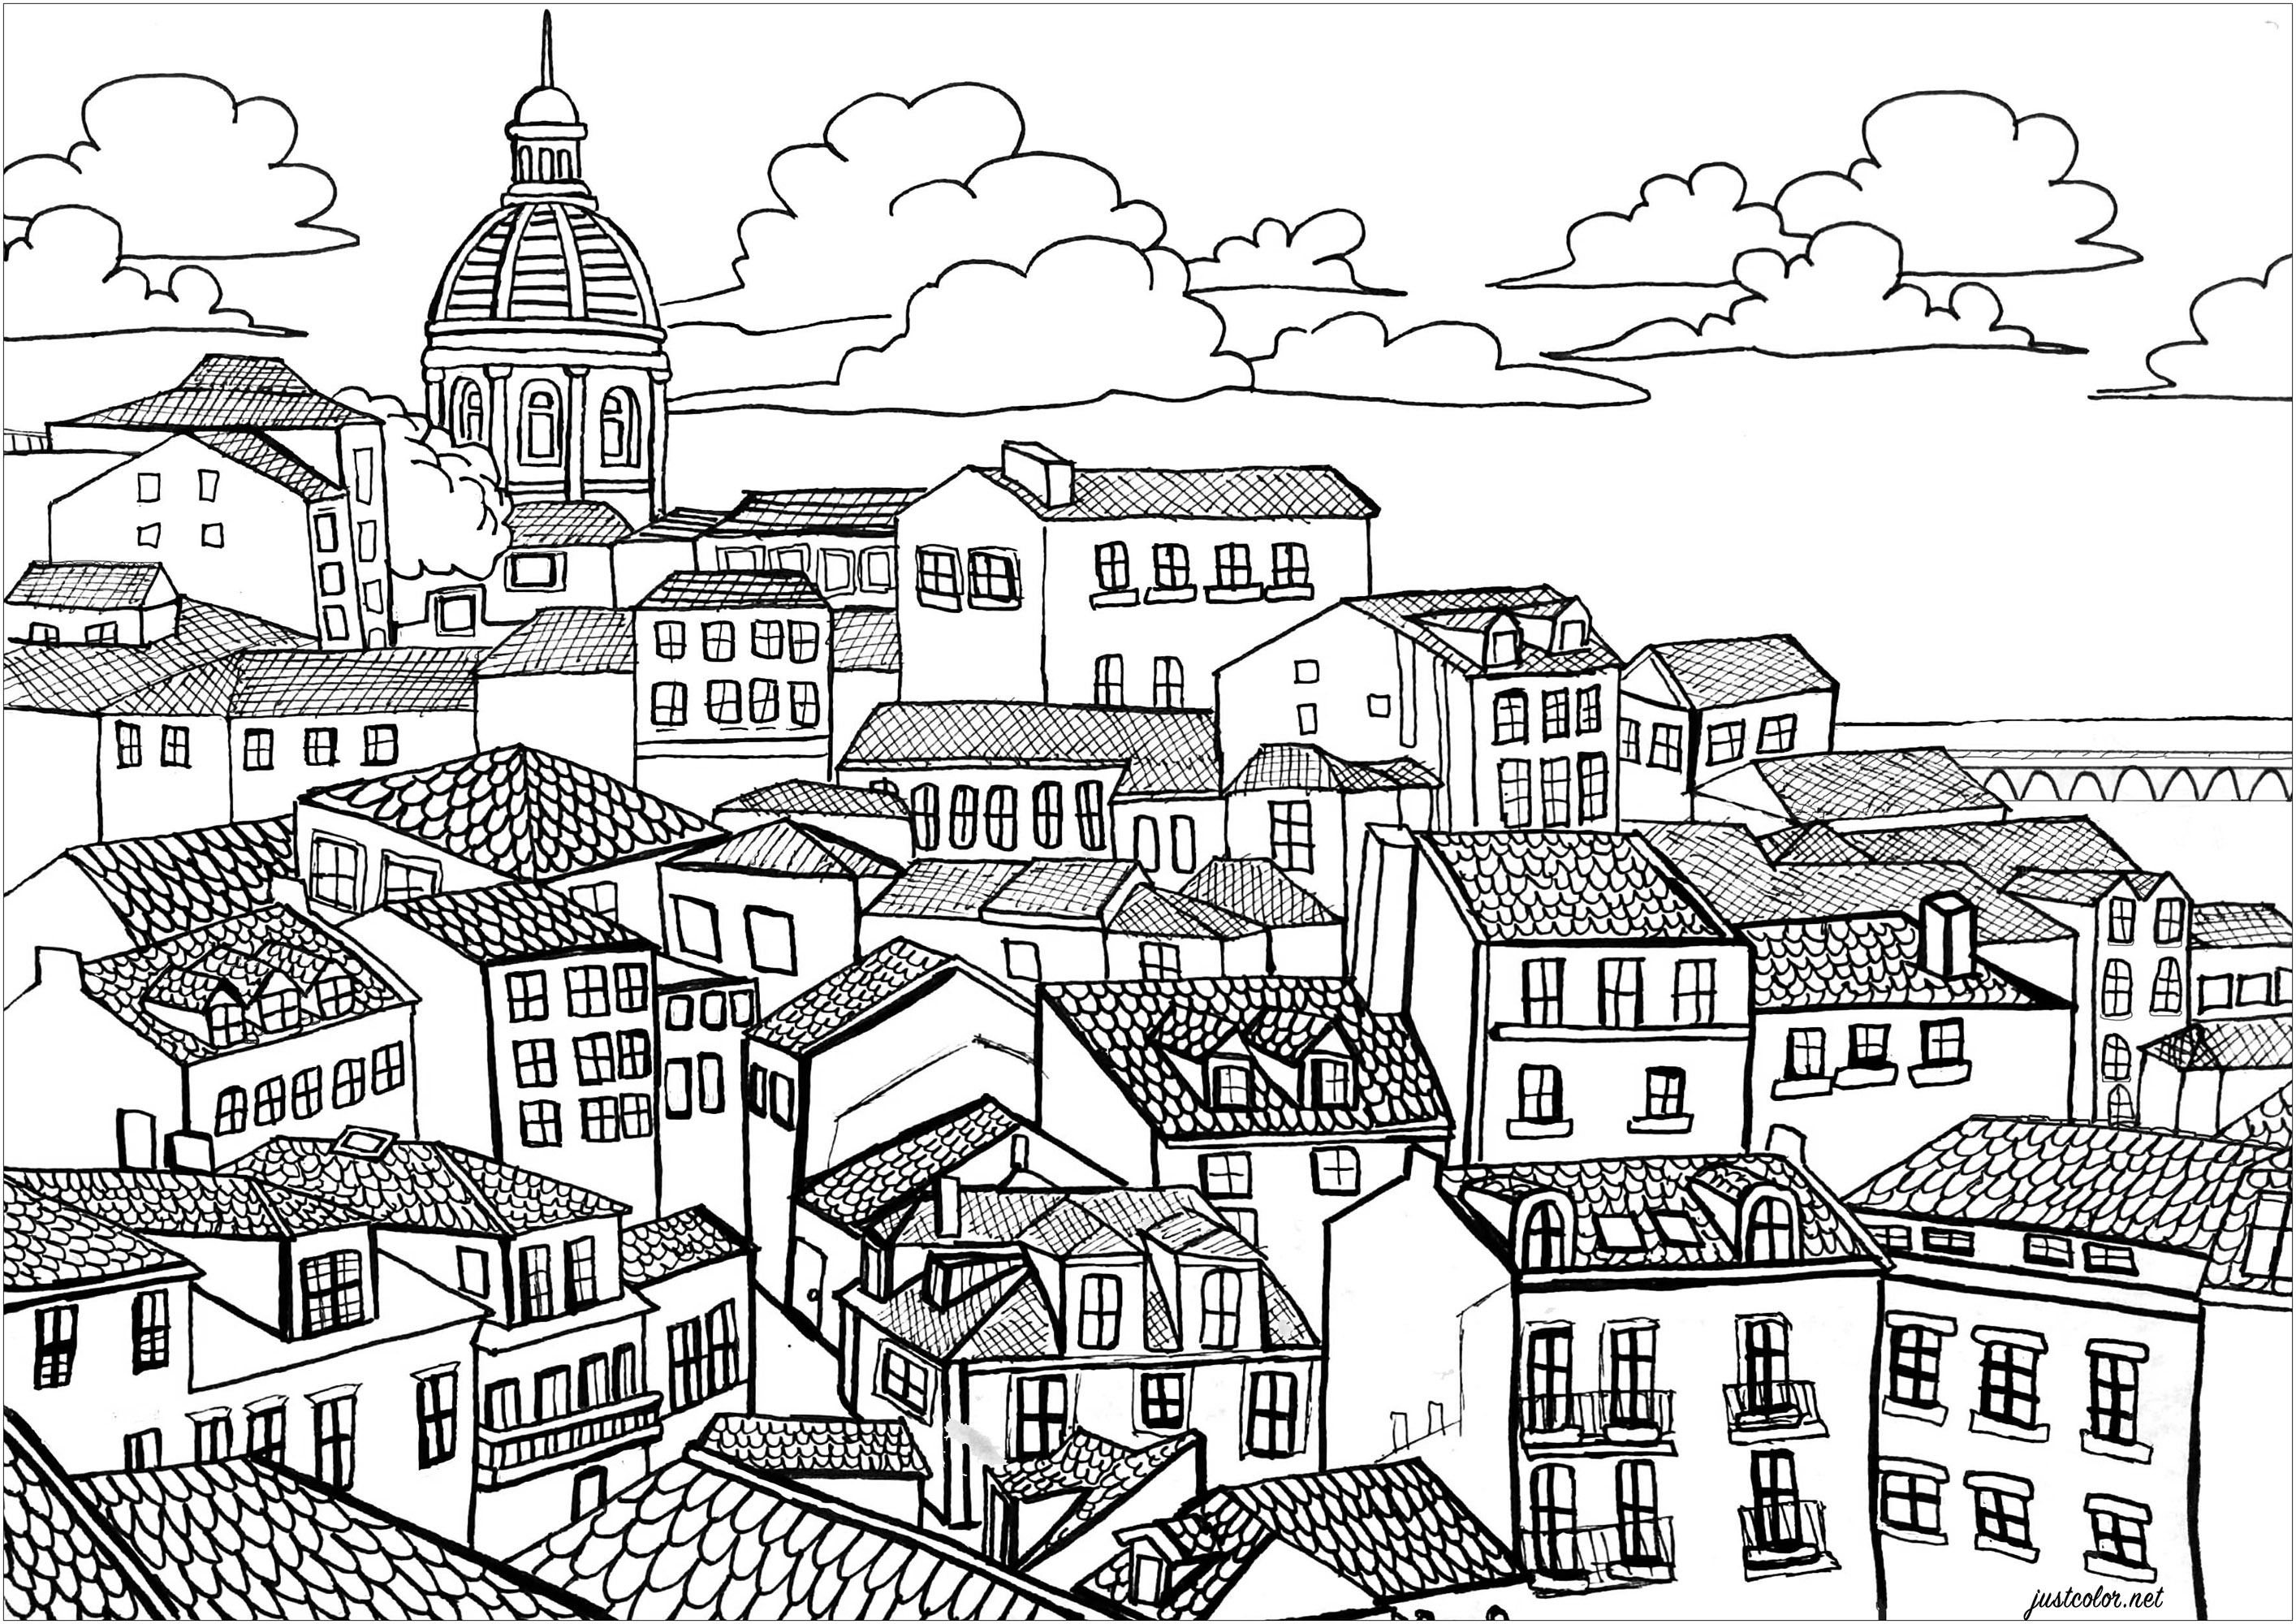 A view over the rooftops of the Alfama district: a real feast for the eyes. A pretty coloring page representing one of Lisbon's most pleasant neighborhoods to visit! A labyrinth of alleyways and small, sloping streets leading down to the Tagus. In the distance, you can see the Vasco de Gama bridge, Artist : Morgan